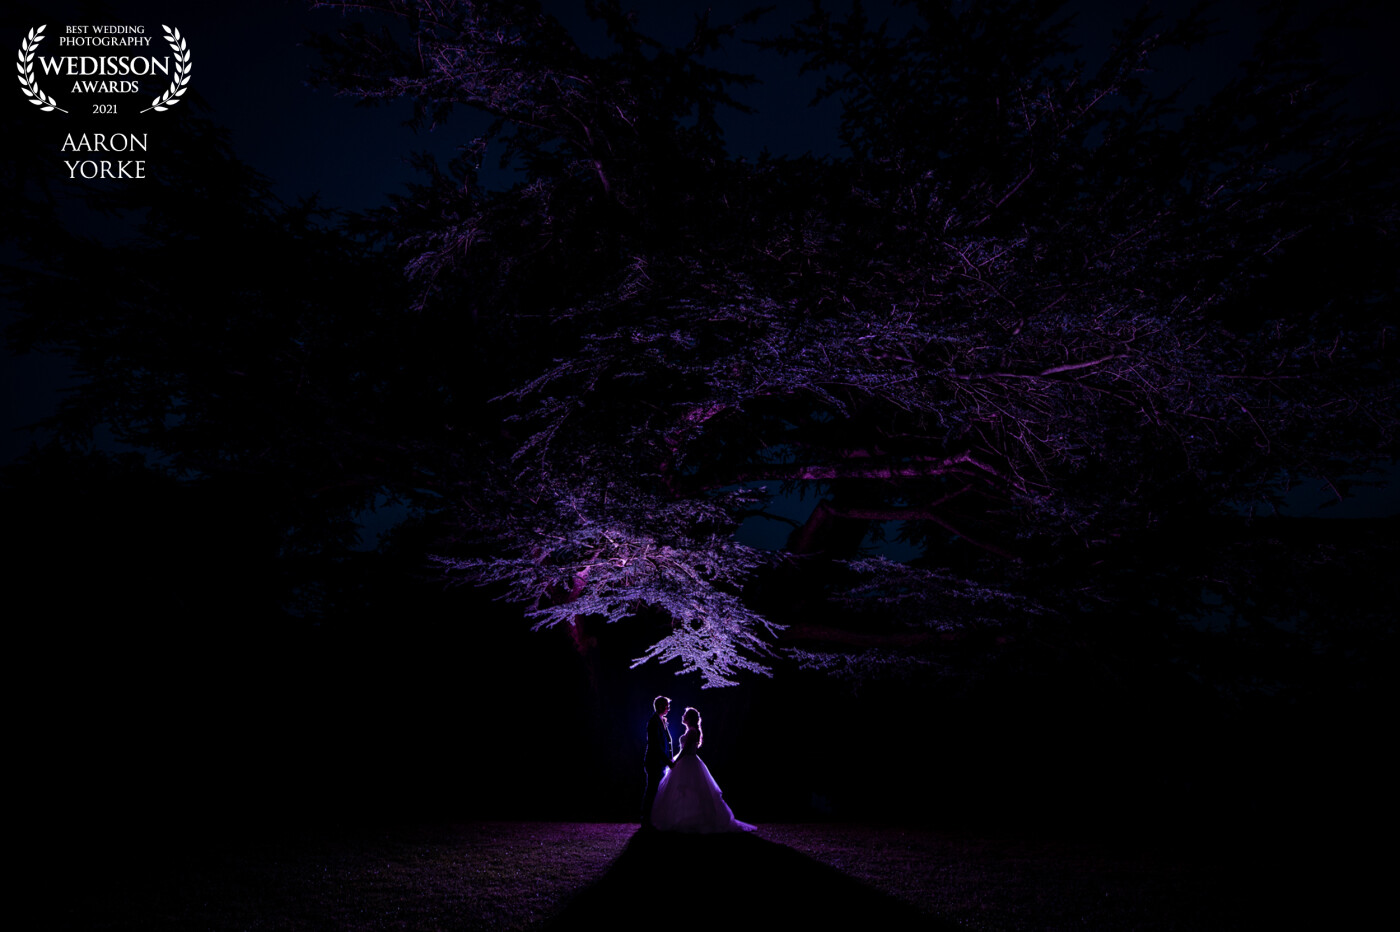 I shot this at a beautiful venue in Gloucestershire called Dumbleton Hall. There is this amazing tree I wanted to use as a silhouette shot. I used a purple get with 2 flash guns on full power. I placed them about 3 metres away from the tree to capture as much of the tree I could and the couple stood about 1 metre in front. ????